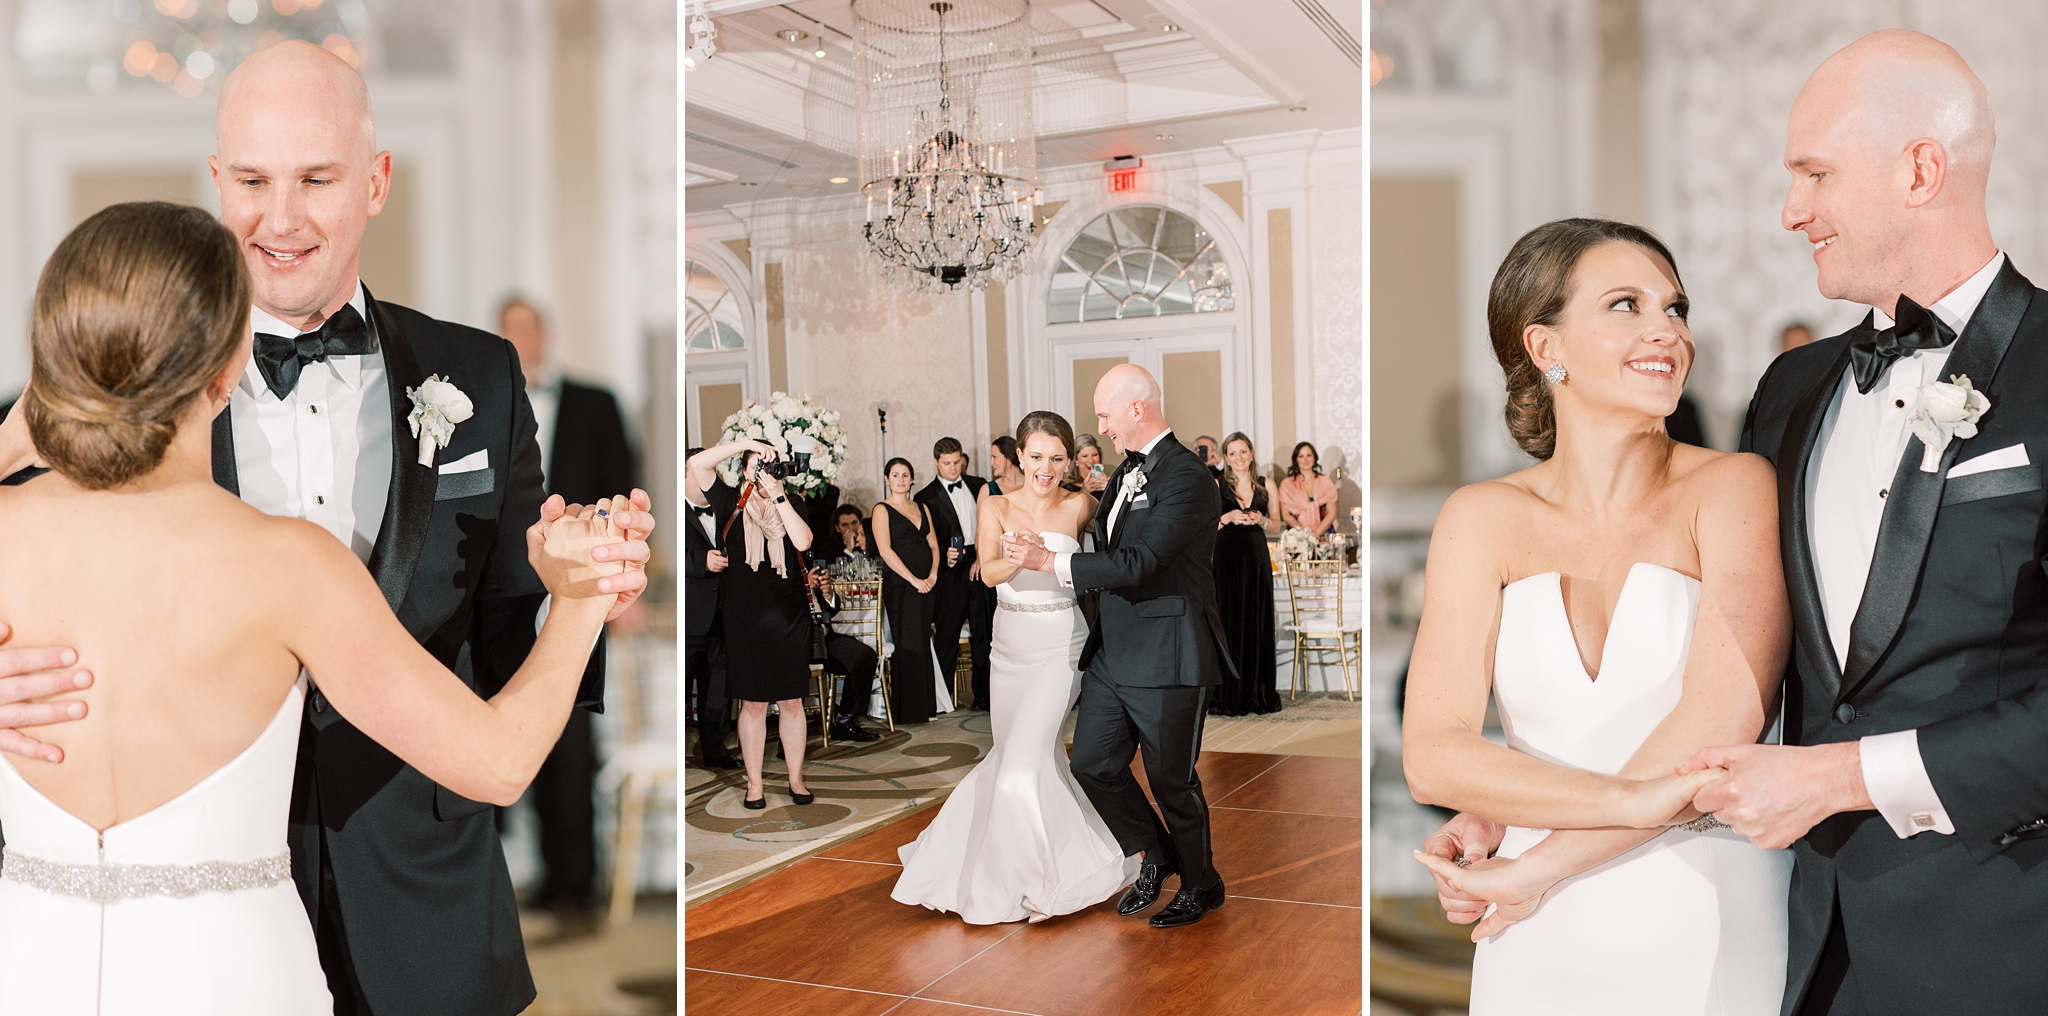 An elegant December wedding at the Fairmont Hotel in Washington, DC designed by EVOKE with florals by Amaryllis.